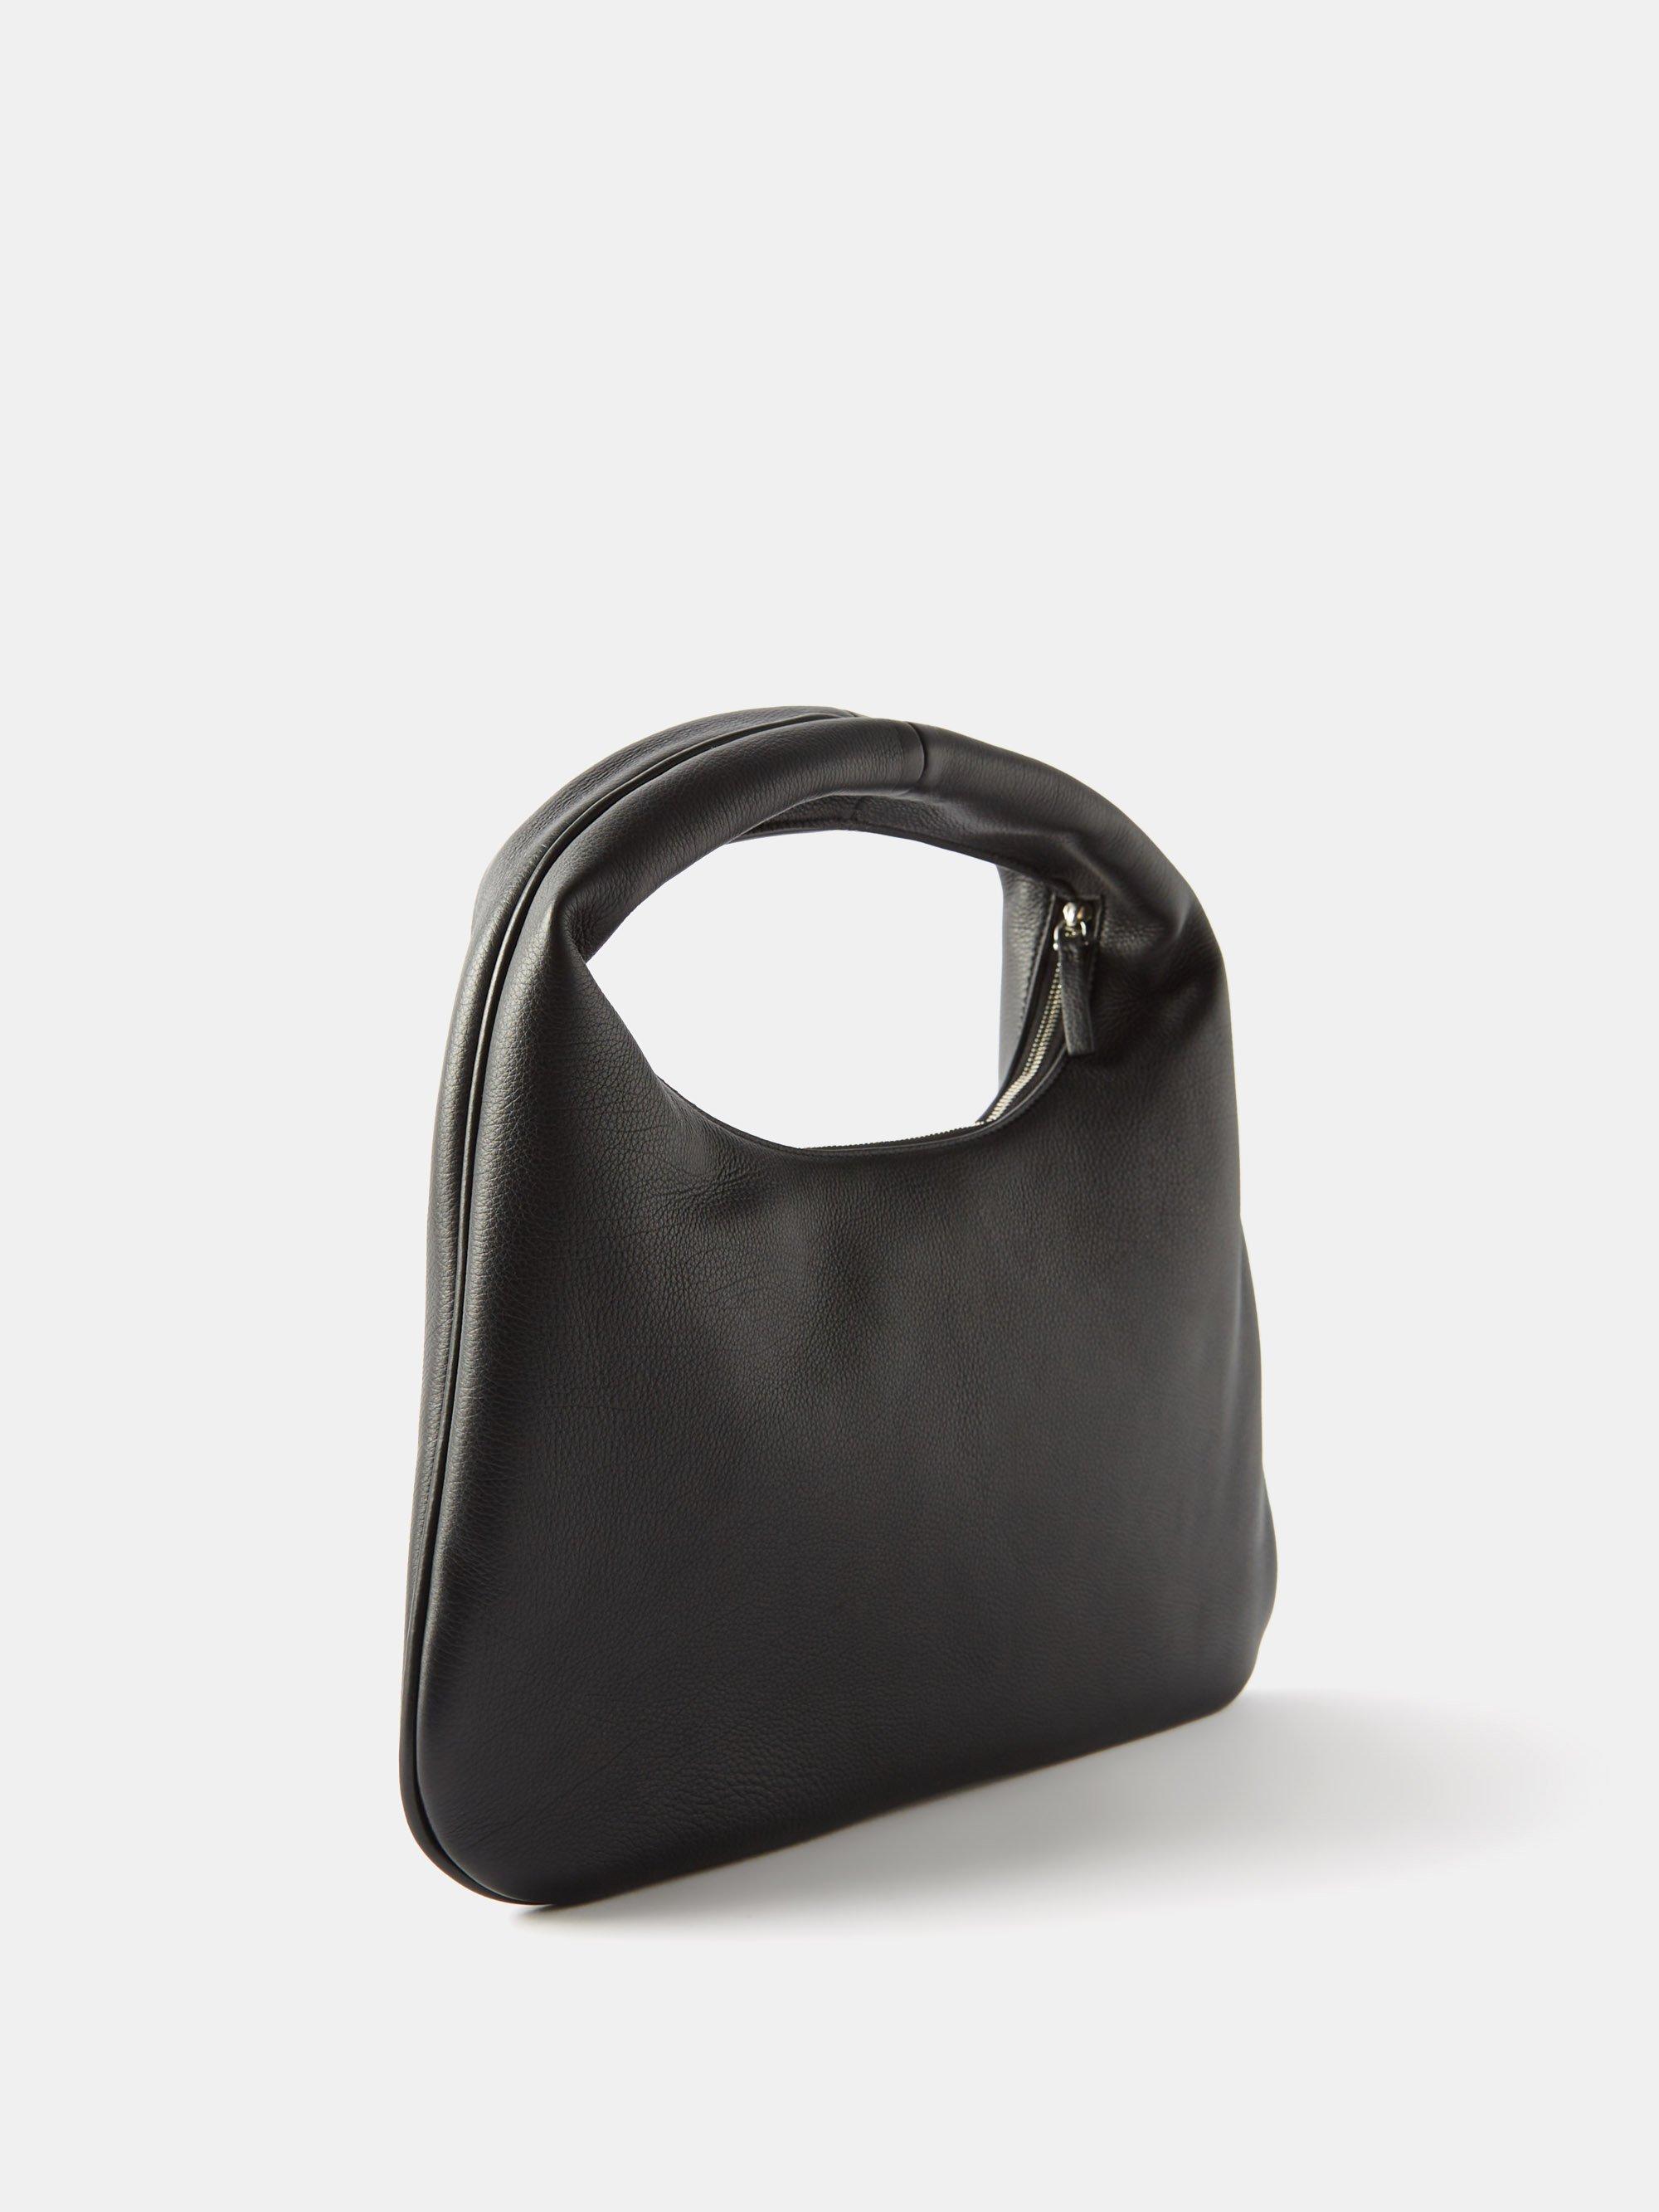 Shop The Row Small Everyday Leather Shoulder Bag